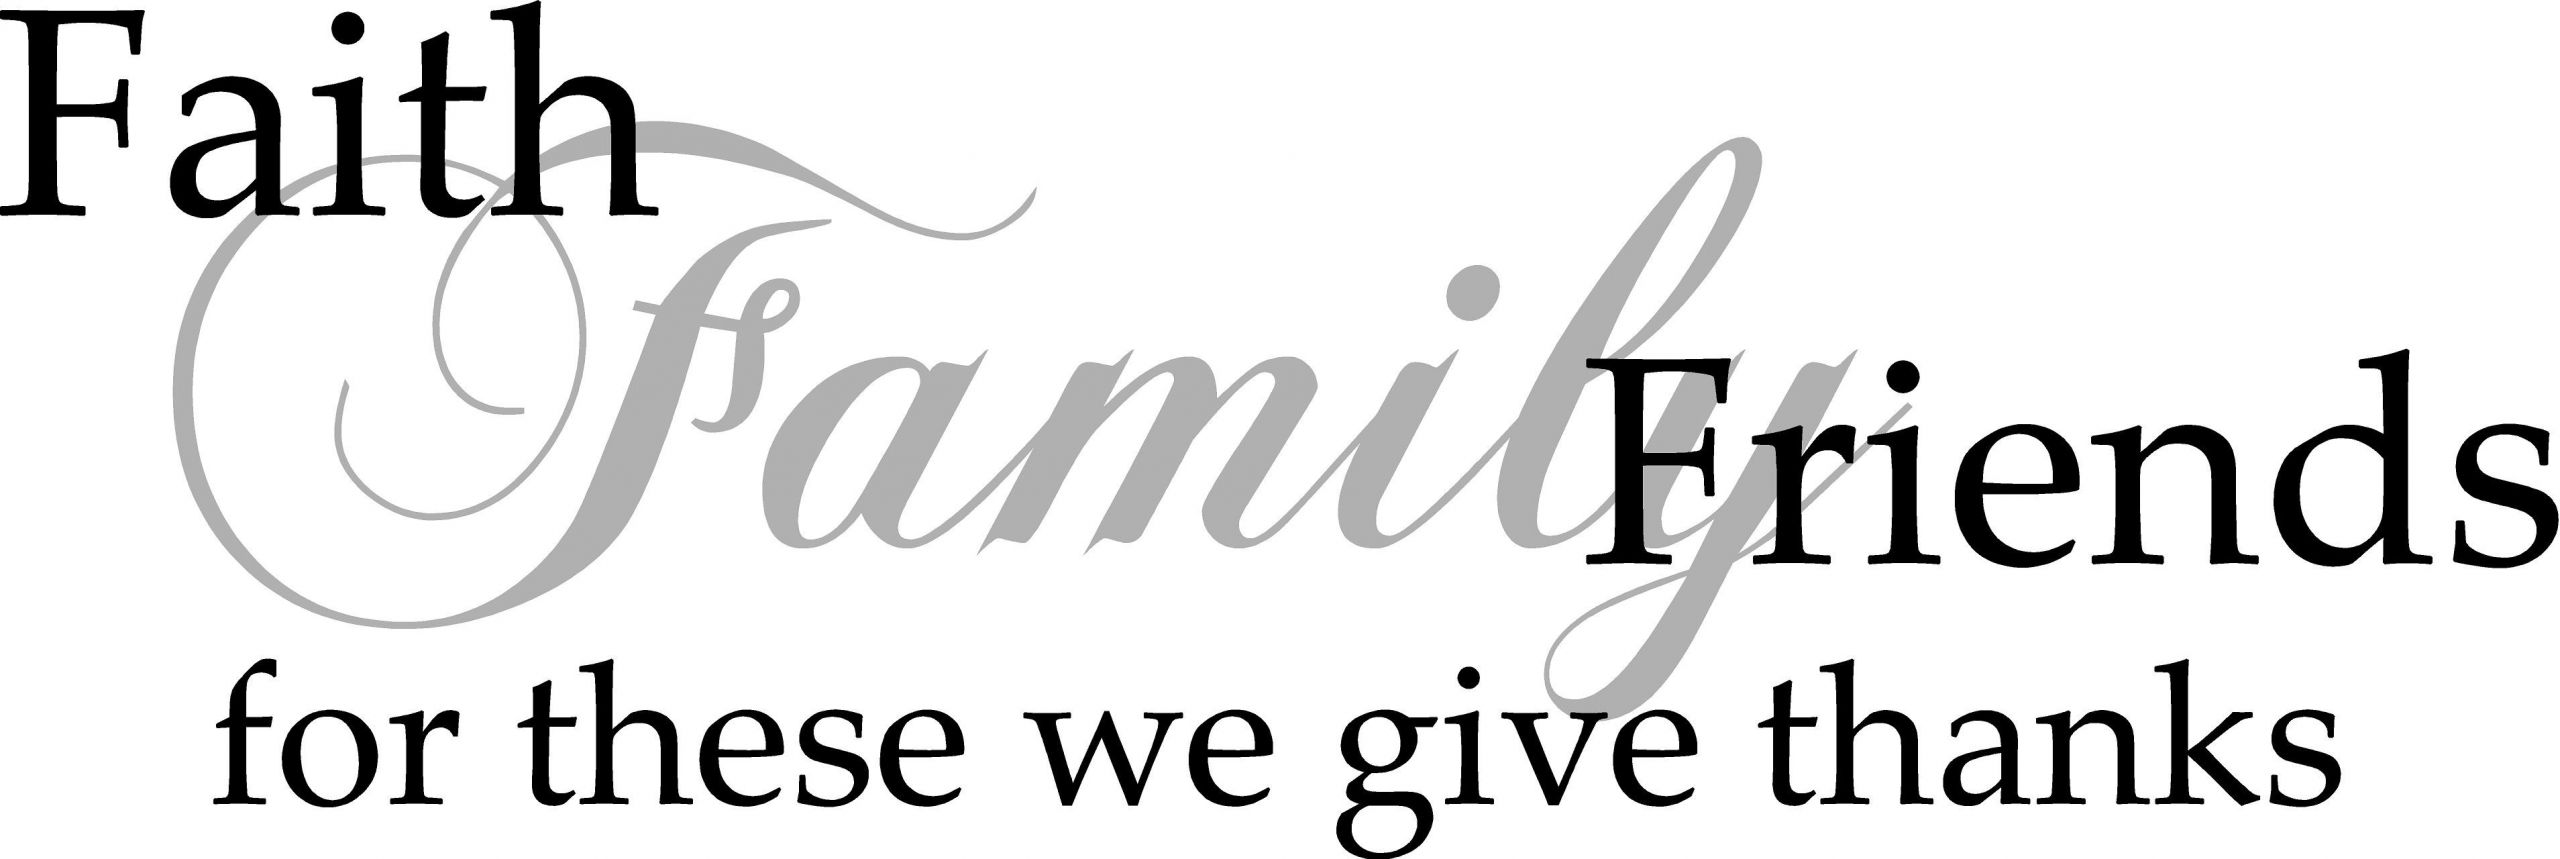 Family Faith Quotes
 Faith Family Friends Quote the Walls